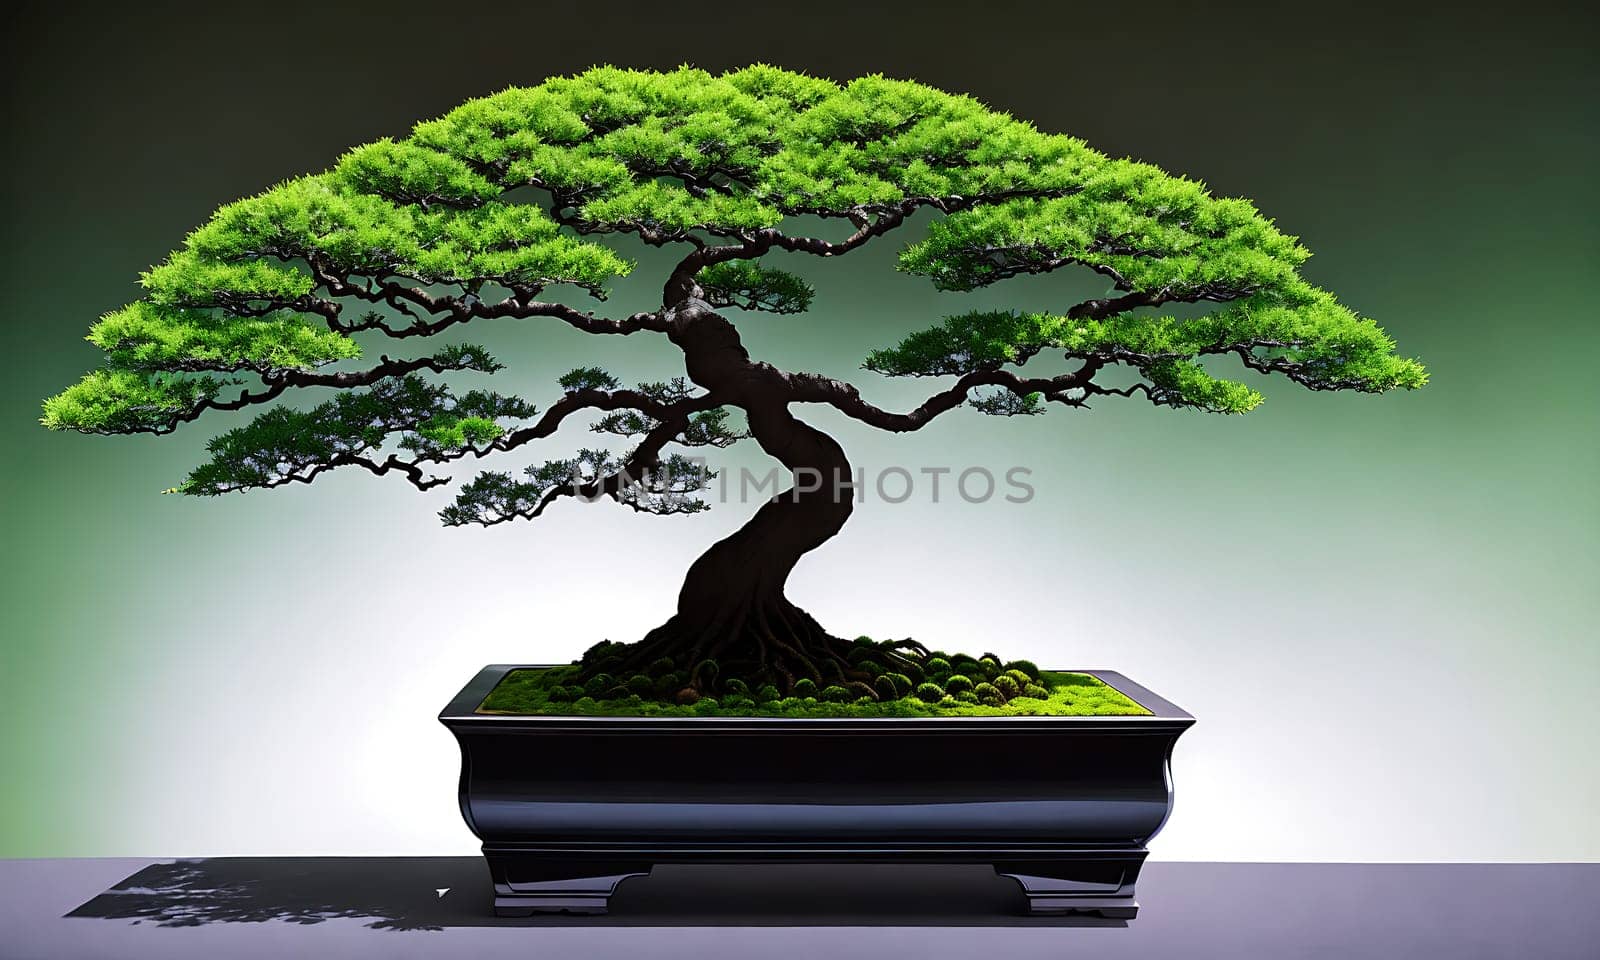 A bonsai tree in a black pot on a wooden table. by creart